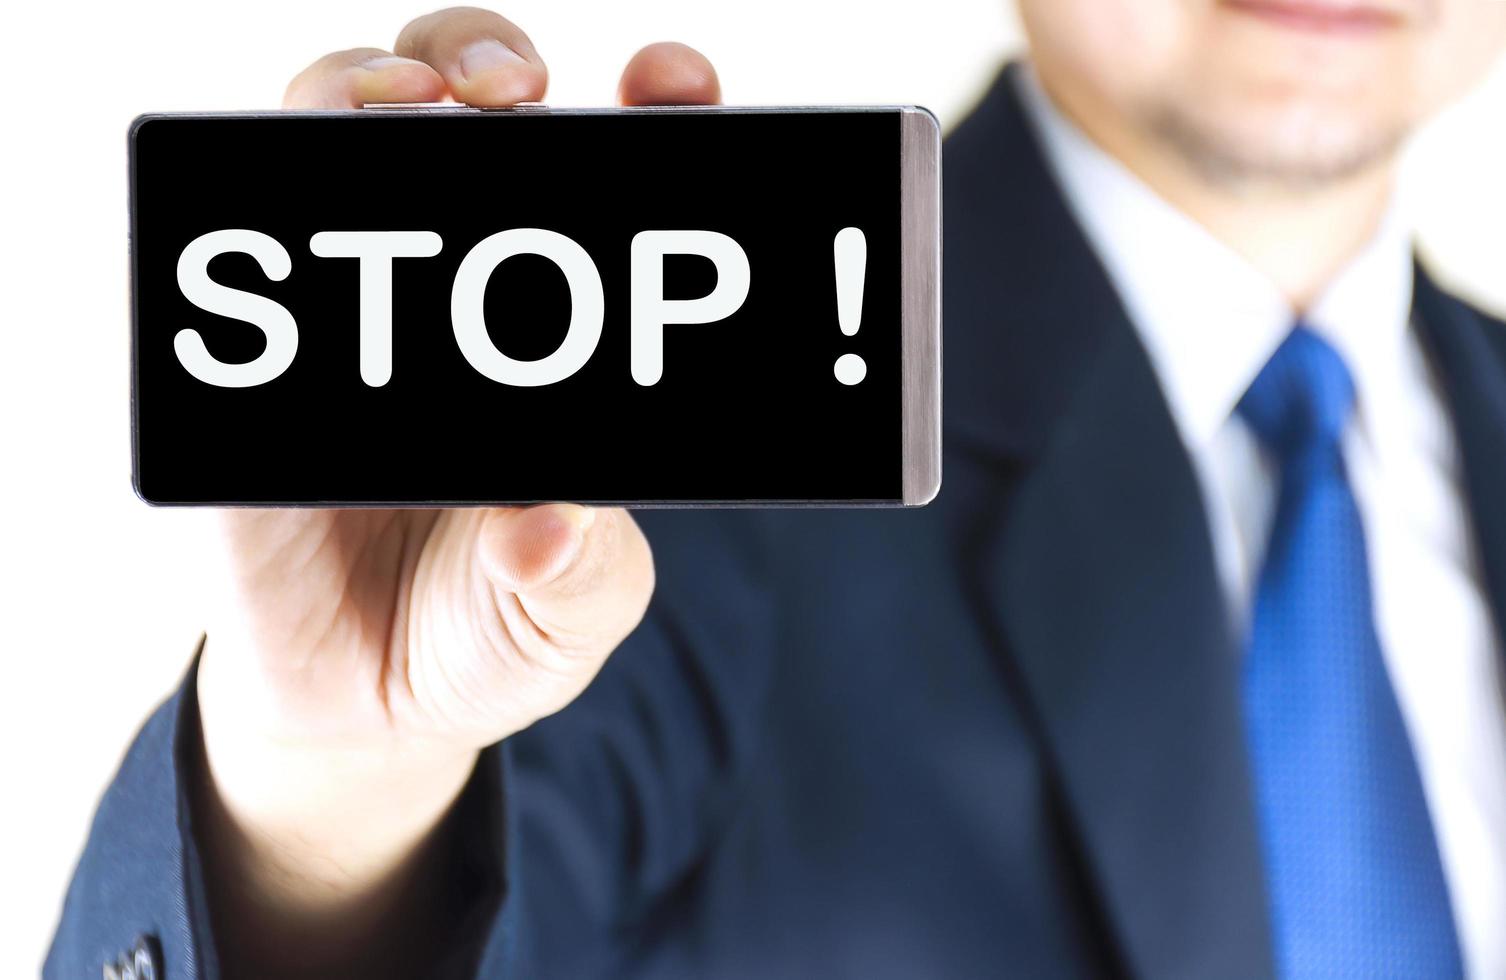 STOP , word on mobile phone screen in blurred young businessman hand over white background, business concept photo